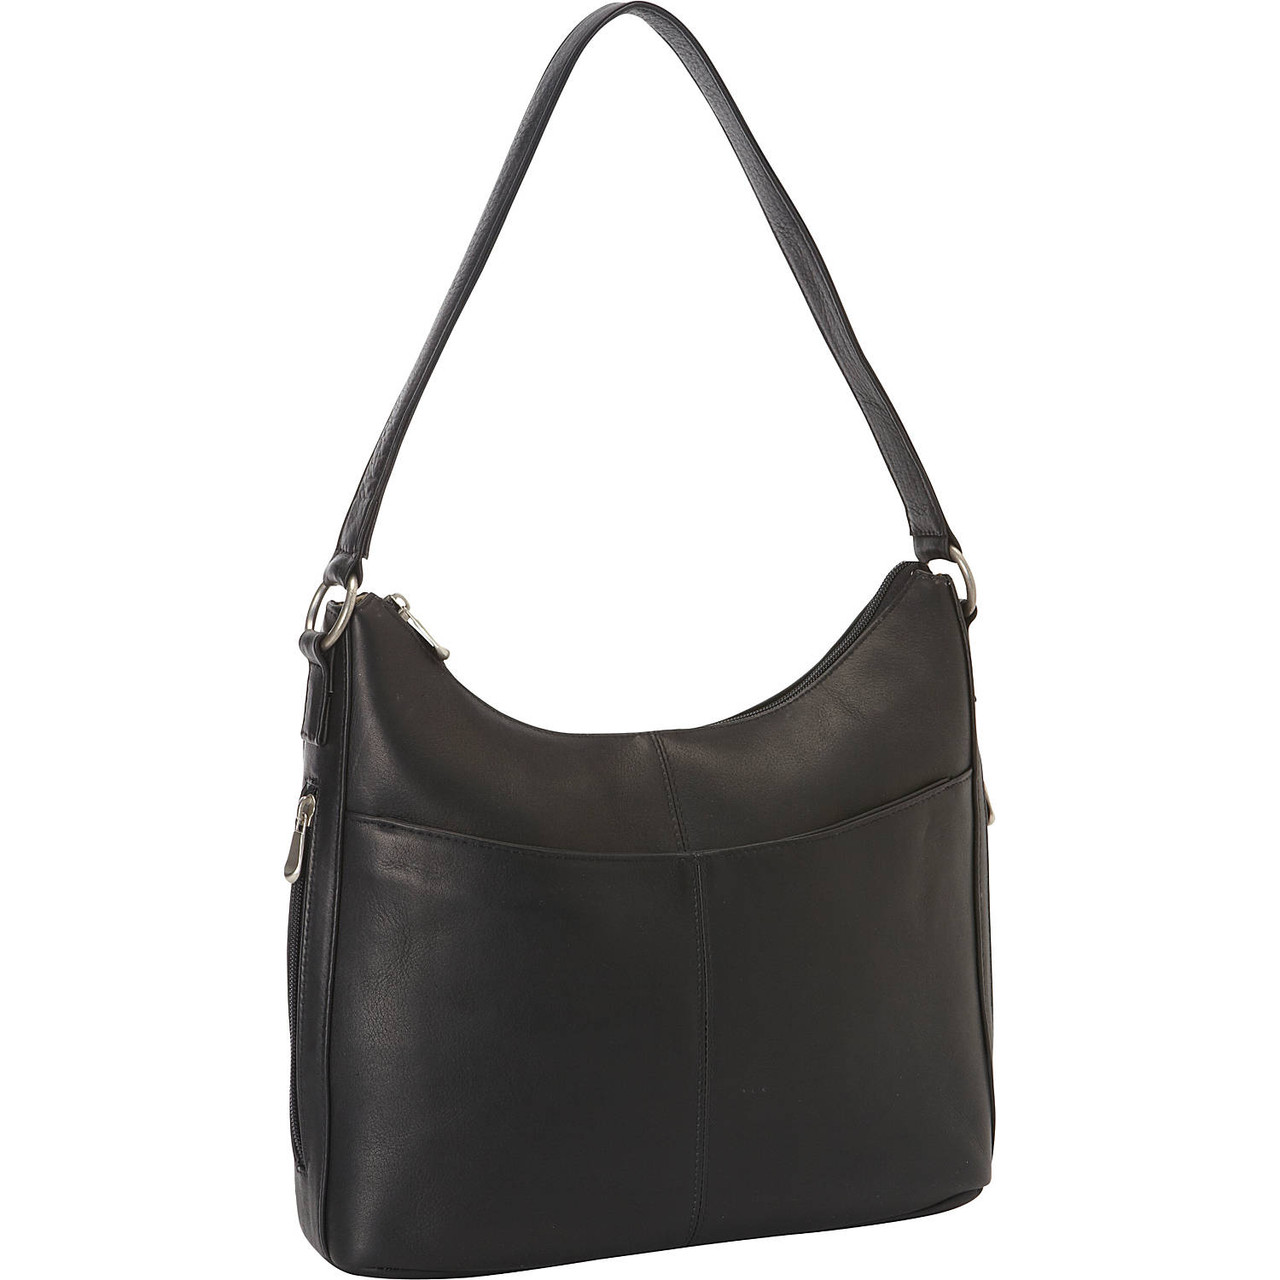 Looking for a leather hobo bag similar to the photo : r/handbags